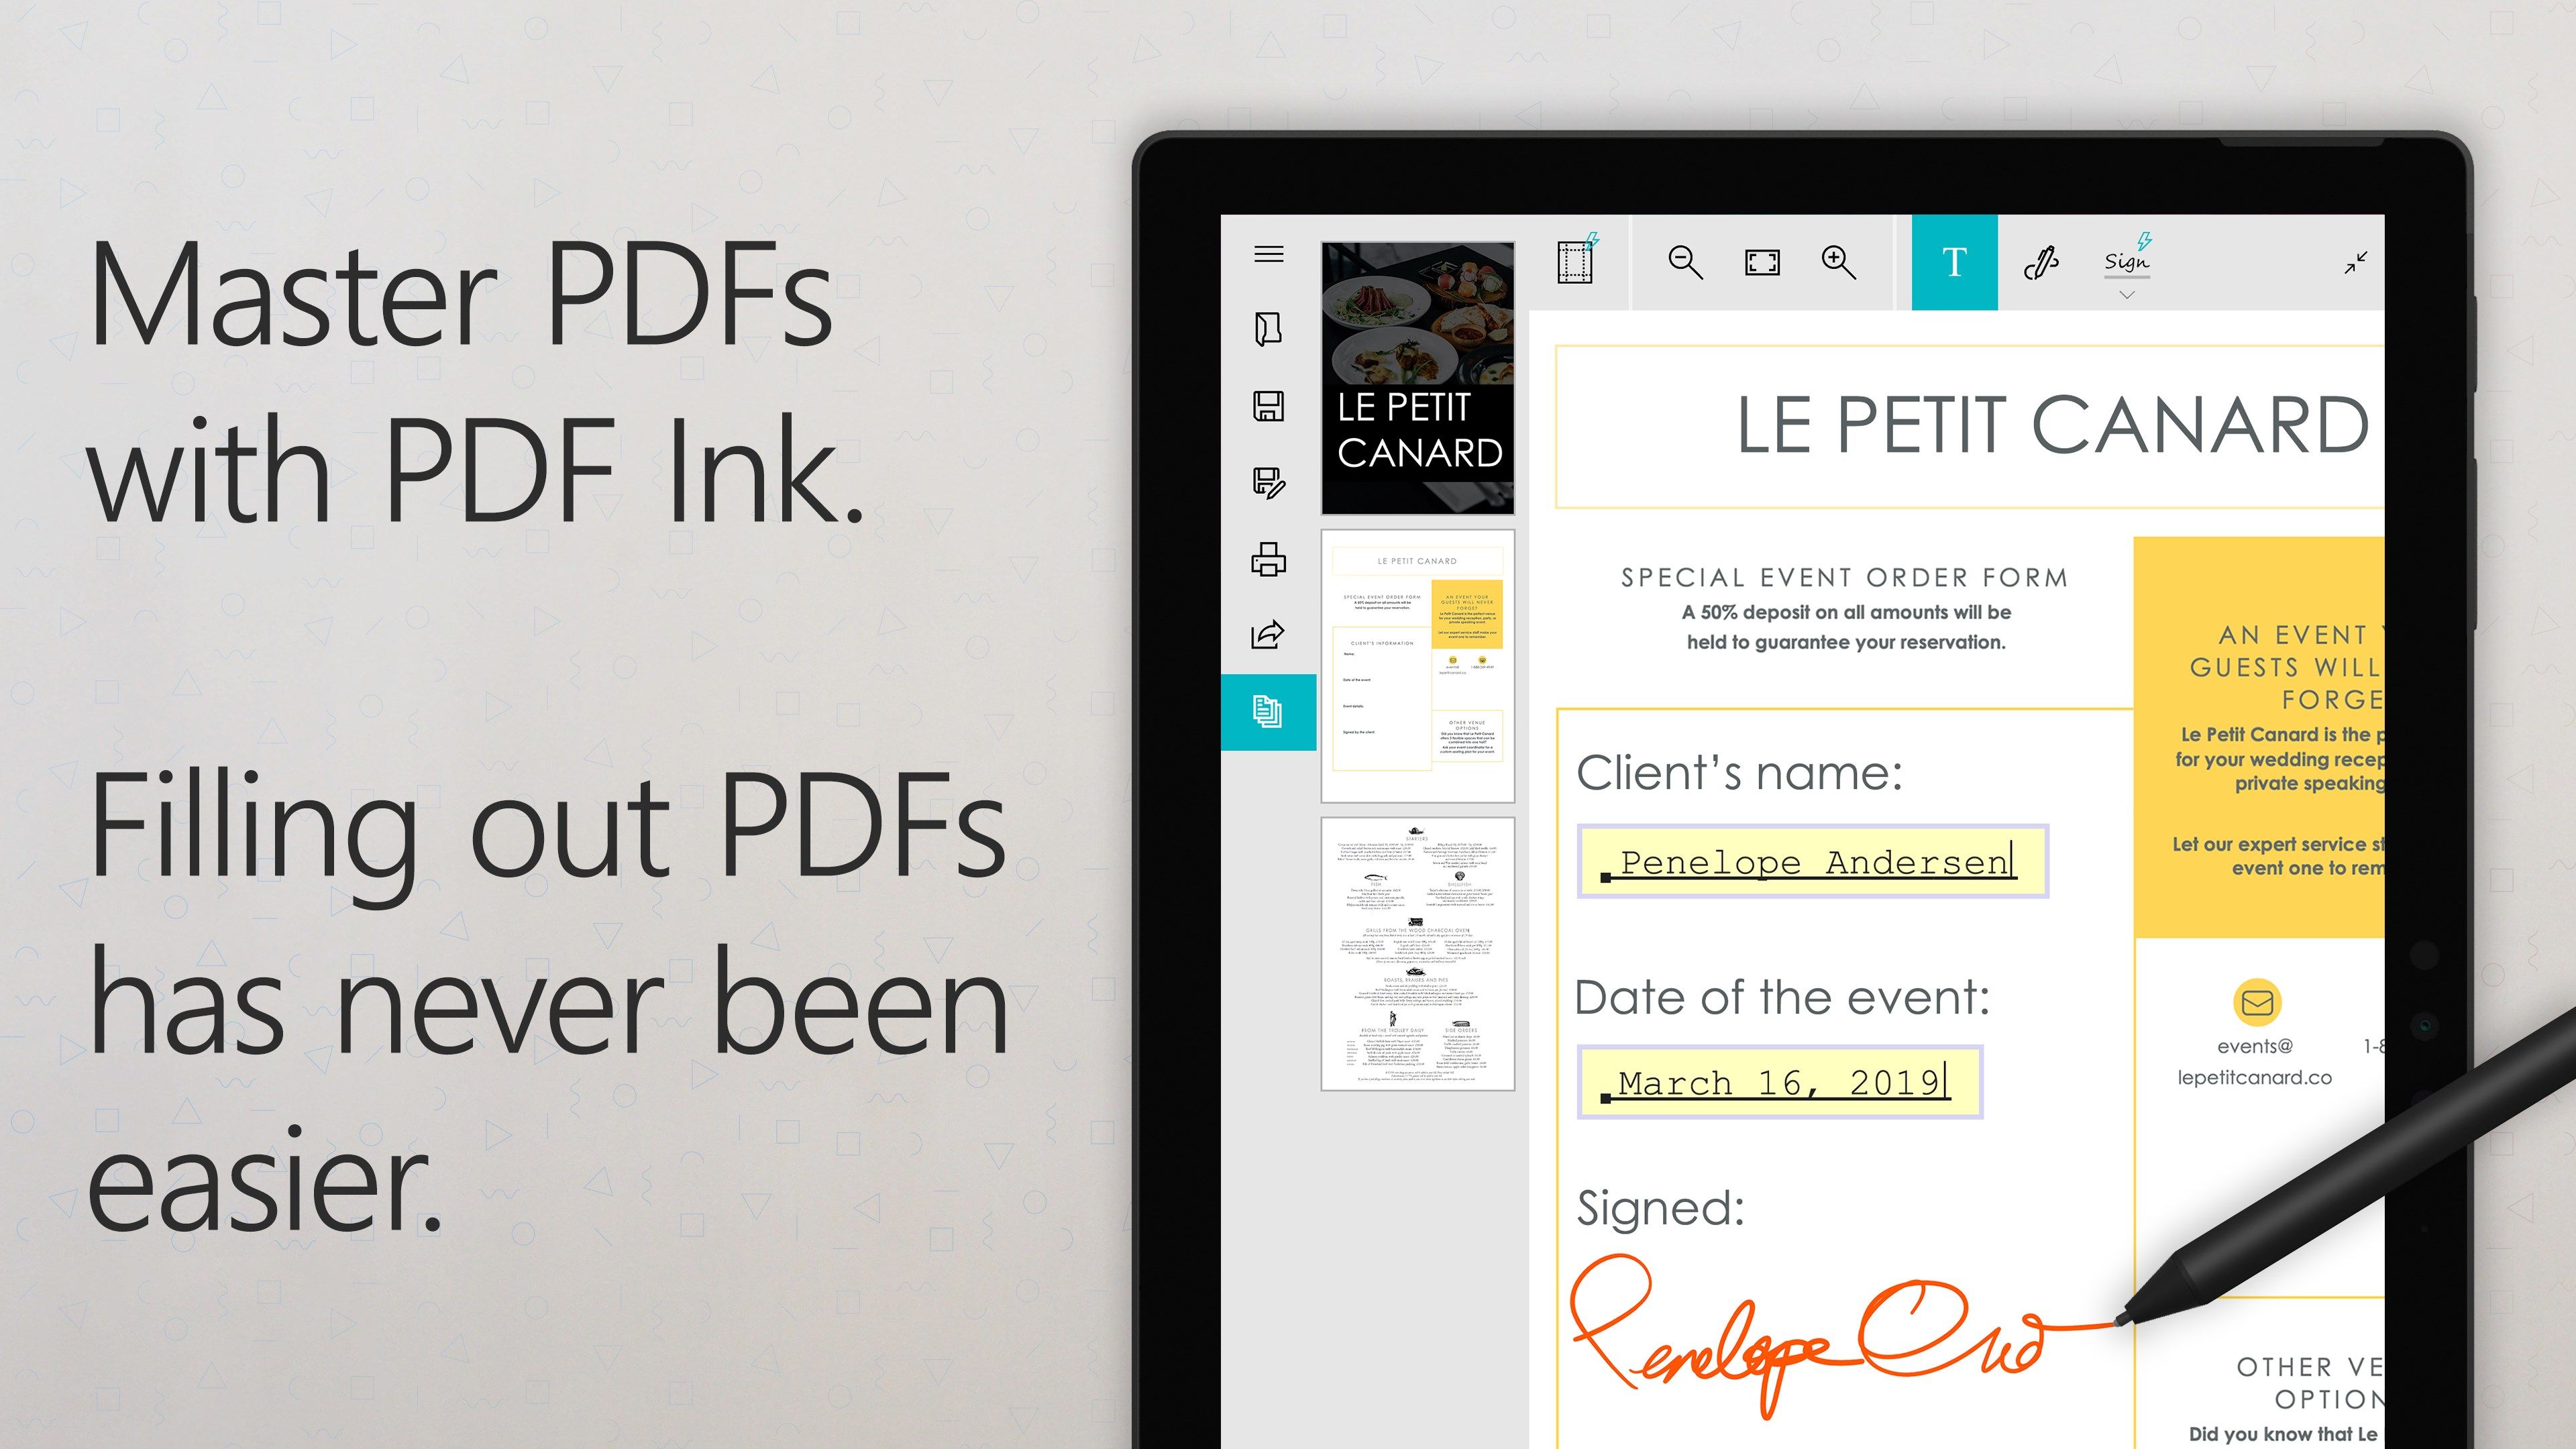 Fill out PDFs with PDF Ink.